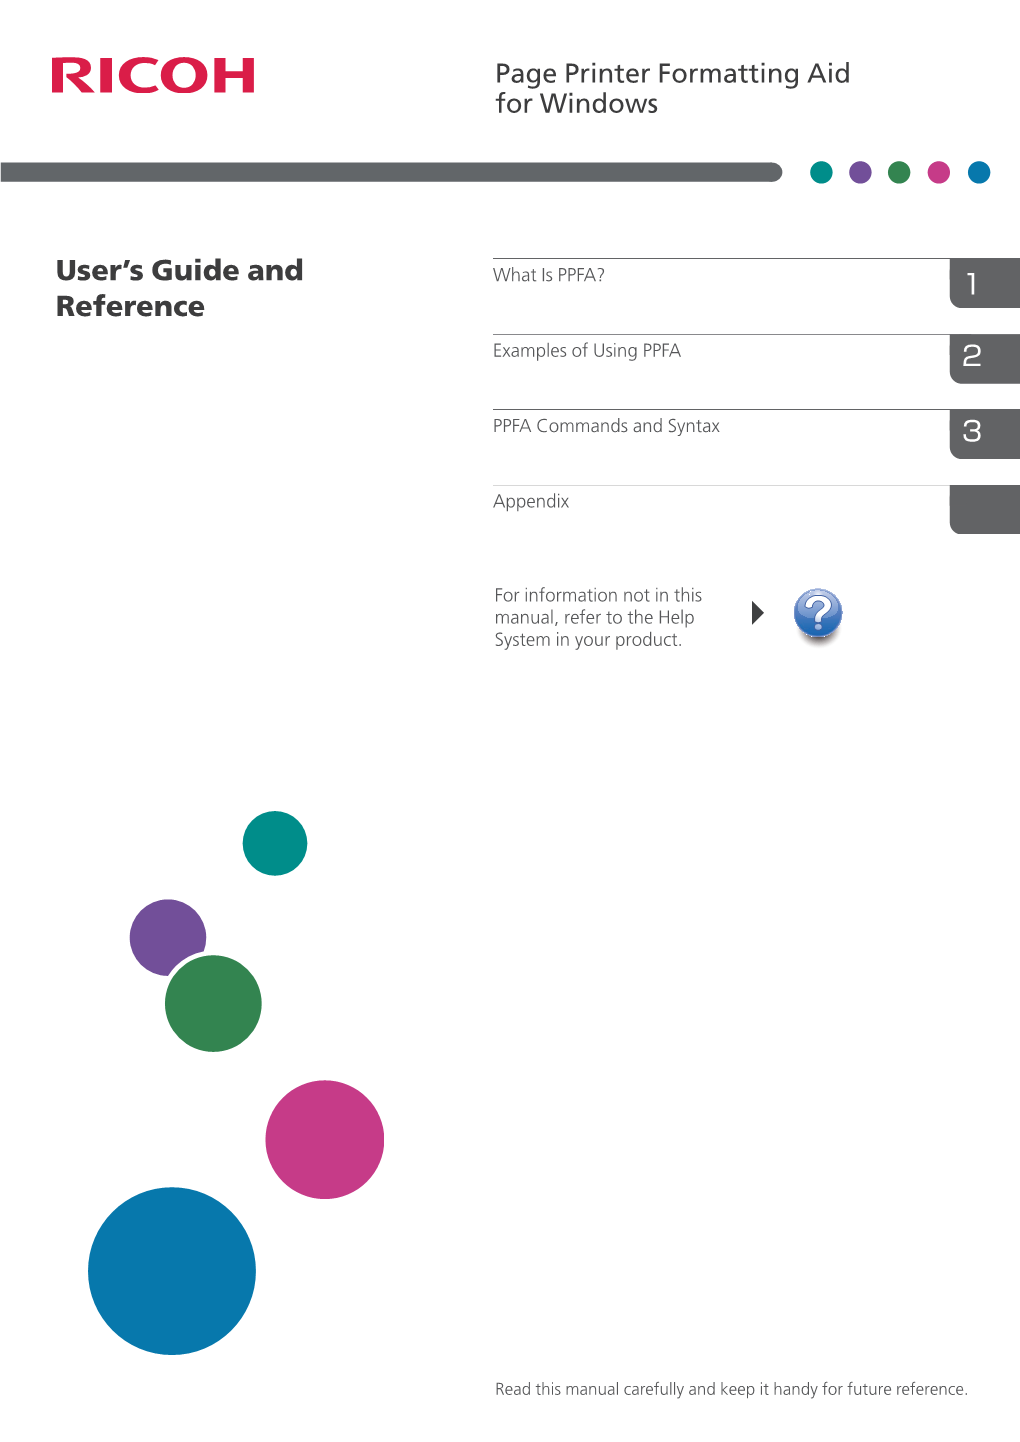 User's Guide and Reference